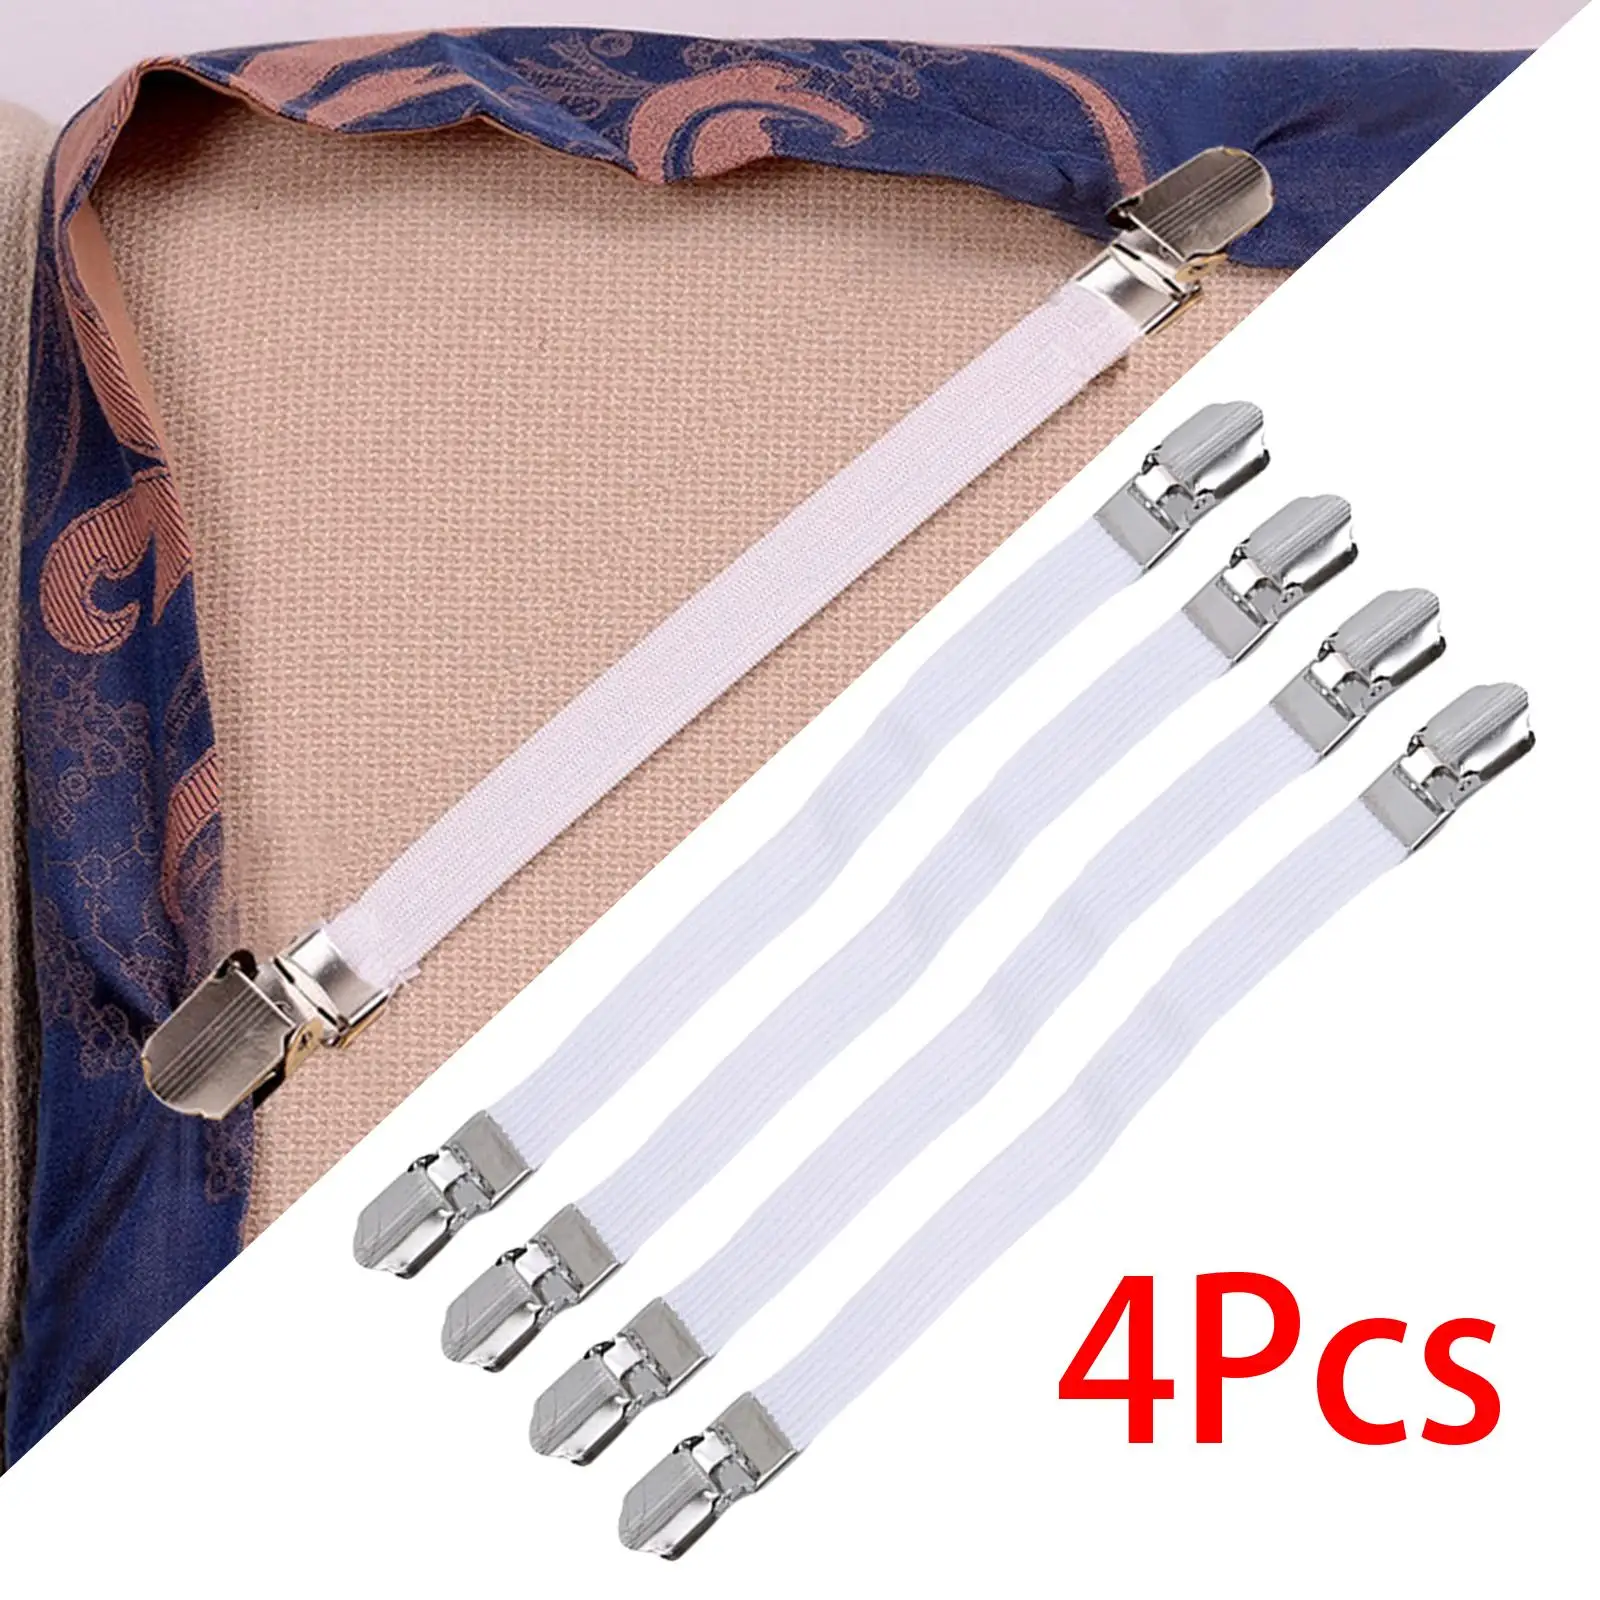 4Pcs Elastic Ironing Board Cover Fasteners, Band Straps Clips, Bed Sheet